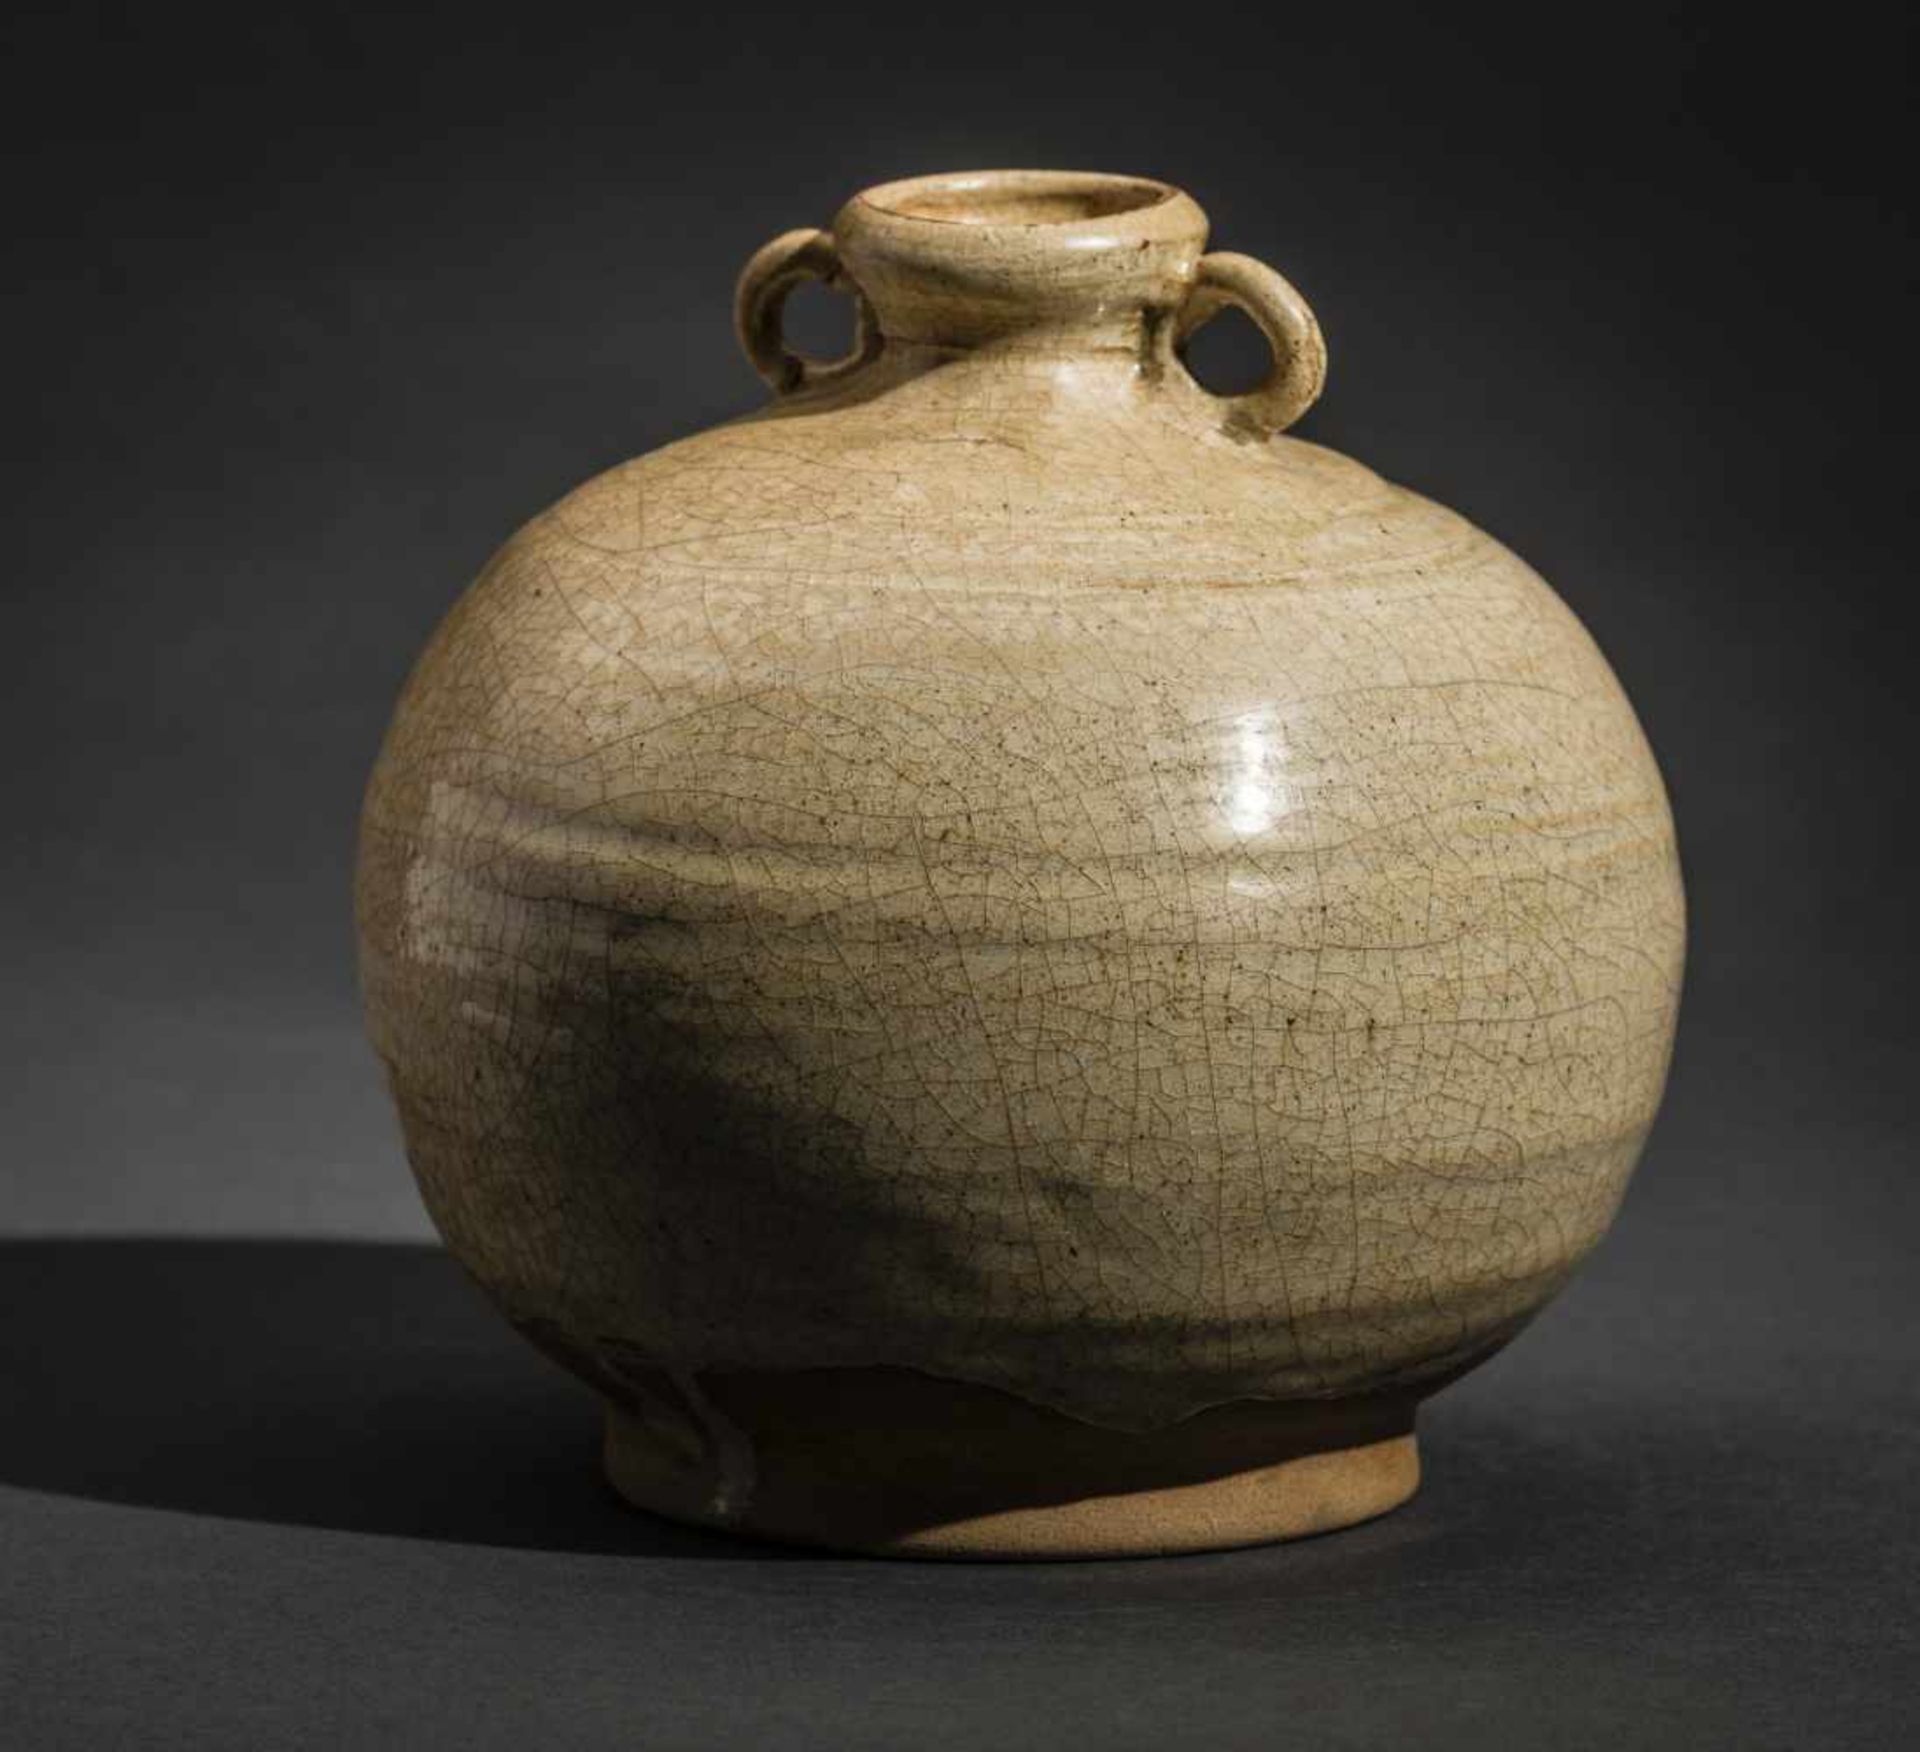 A SPHERICAL CONTAINER WITH LOOP HANDLESGlazed ceramicChina, Qing dynasty (1644-1911)Bright glaze - Bild 3 aus 4